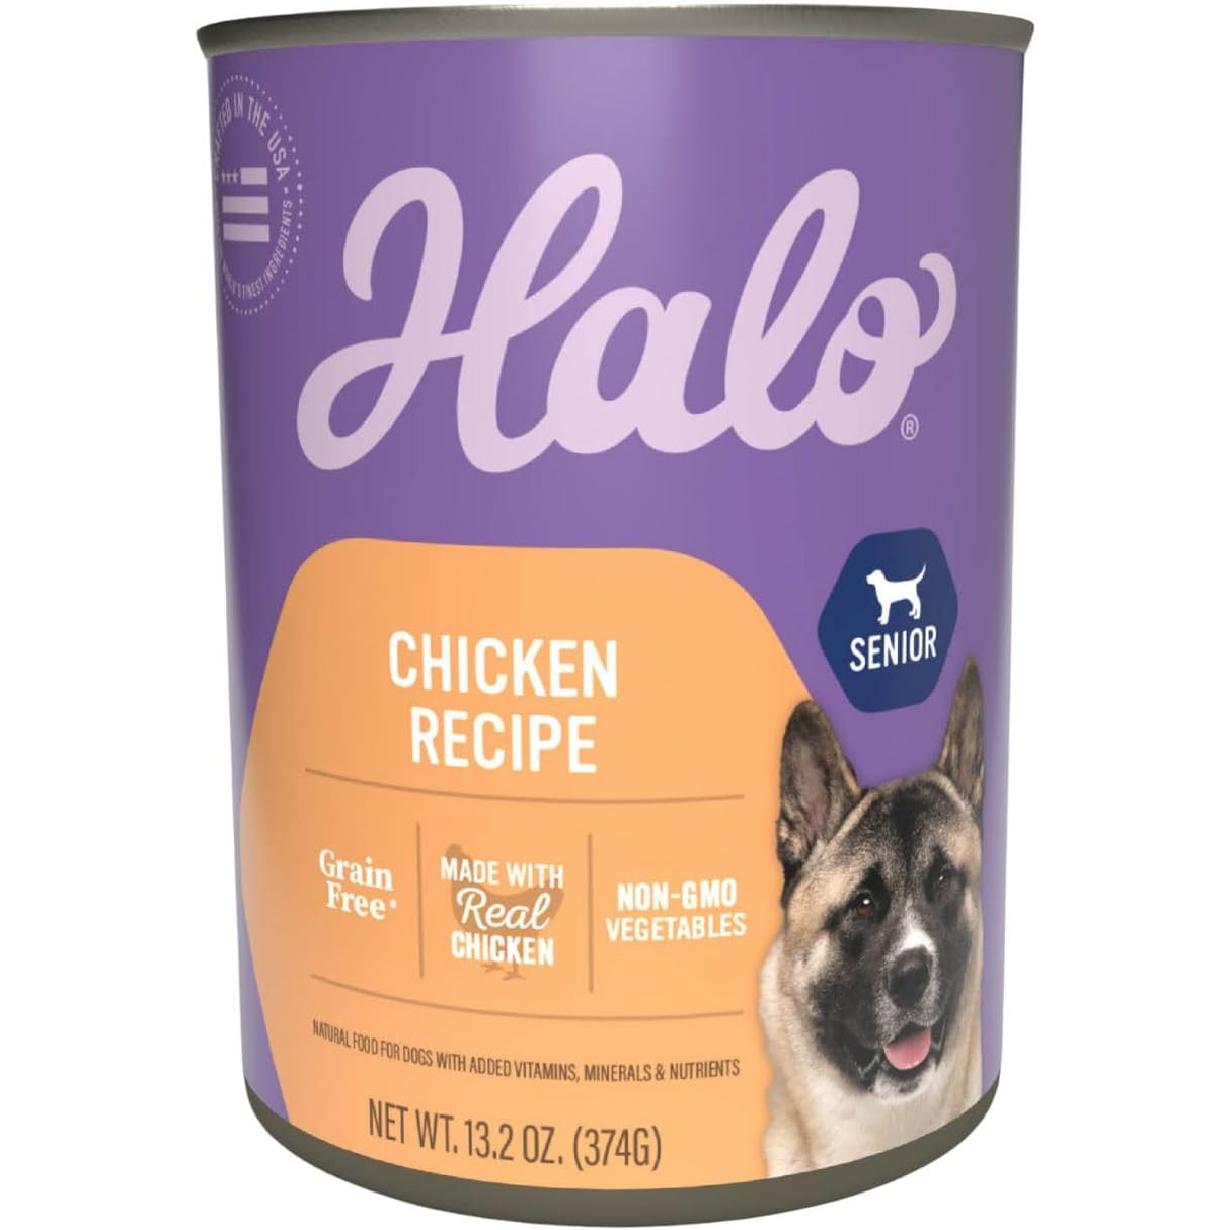 New Project Halo Senior Dog Wet Food, Chicken Recipe, Great as Nutritious Meals or Healthy Dog Food Toppers 